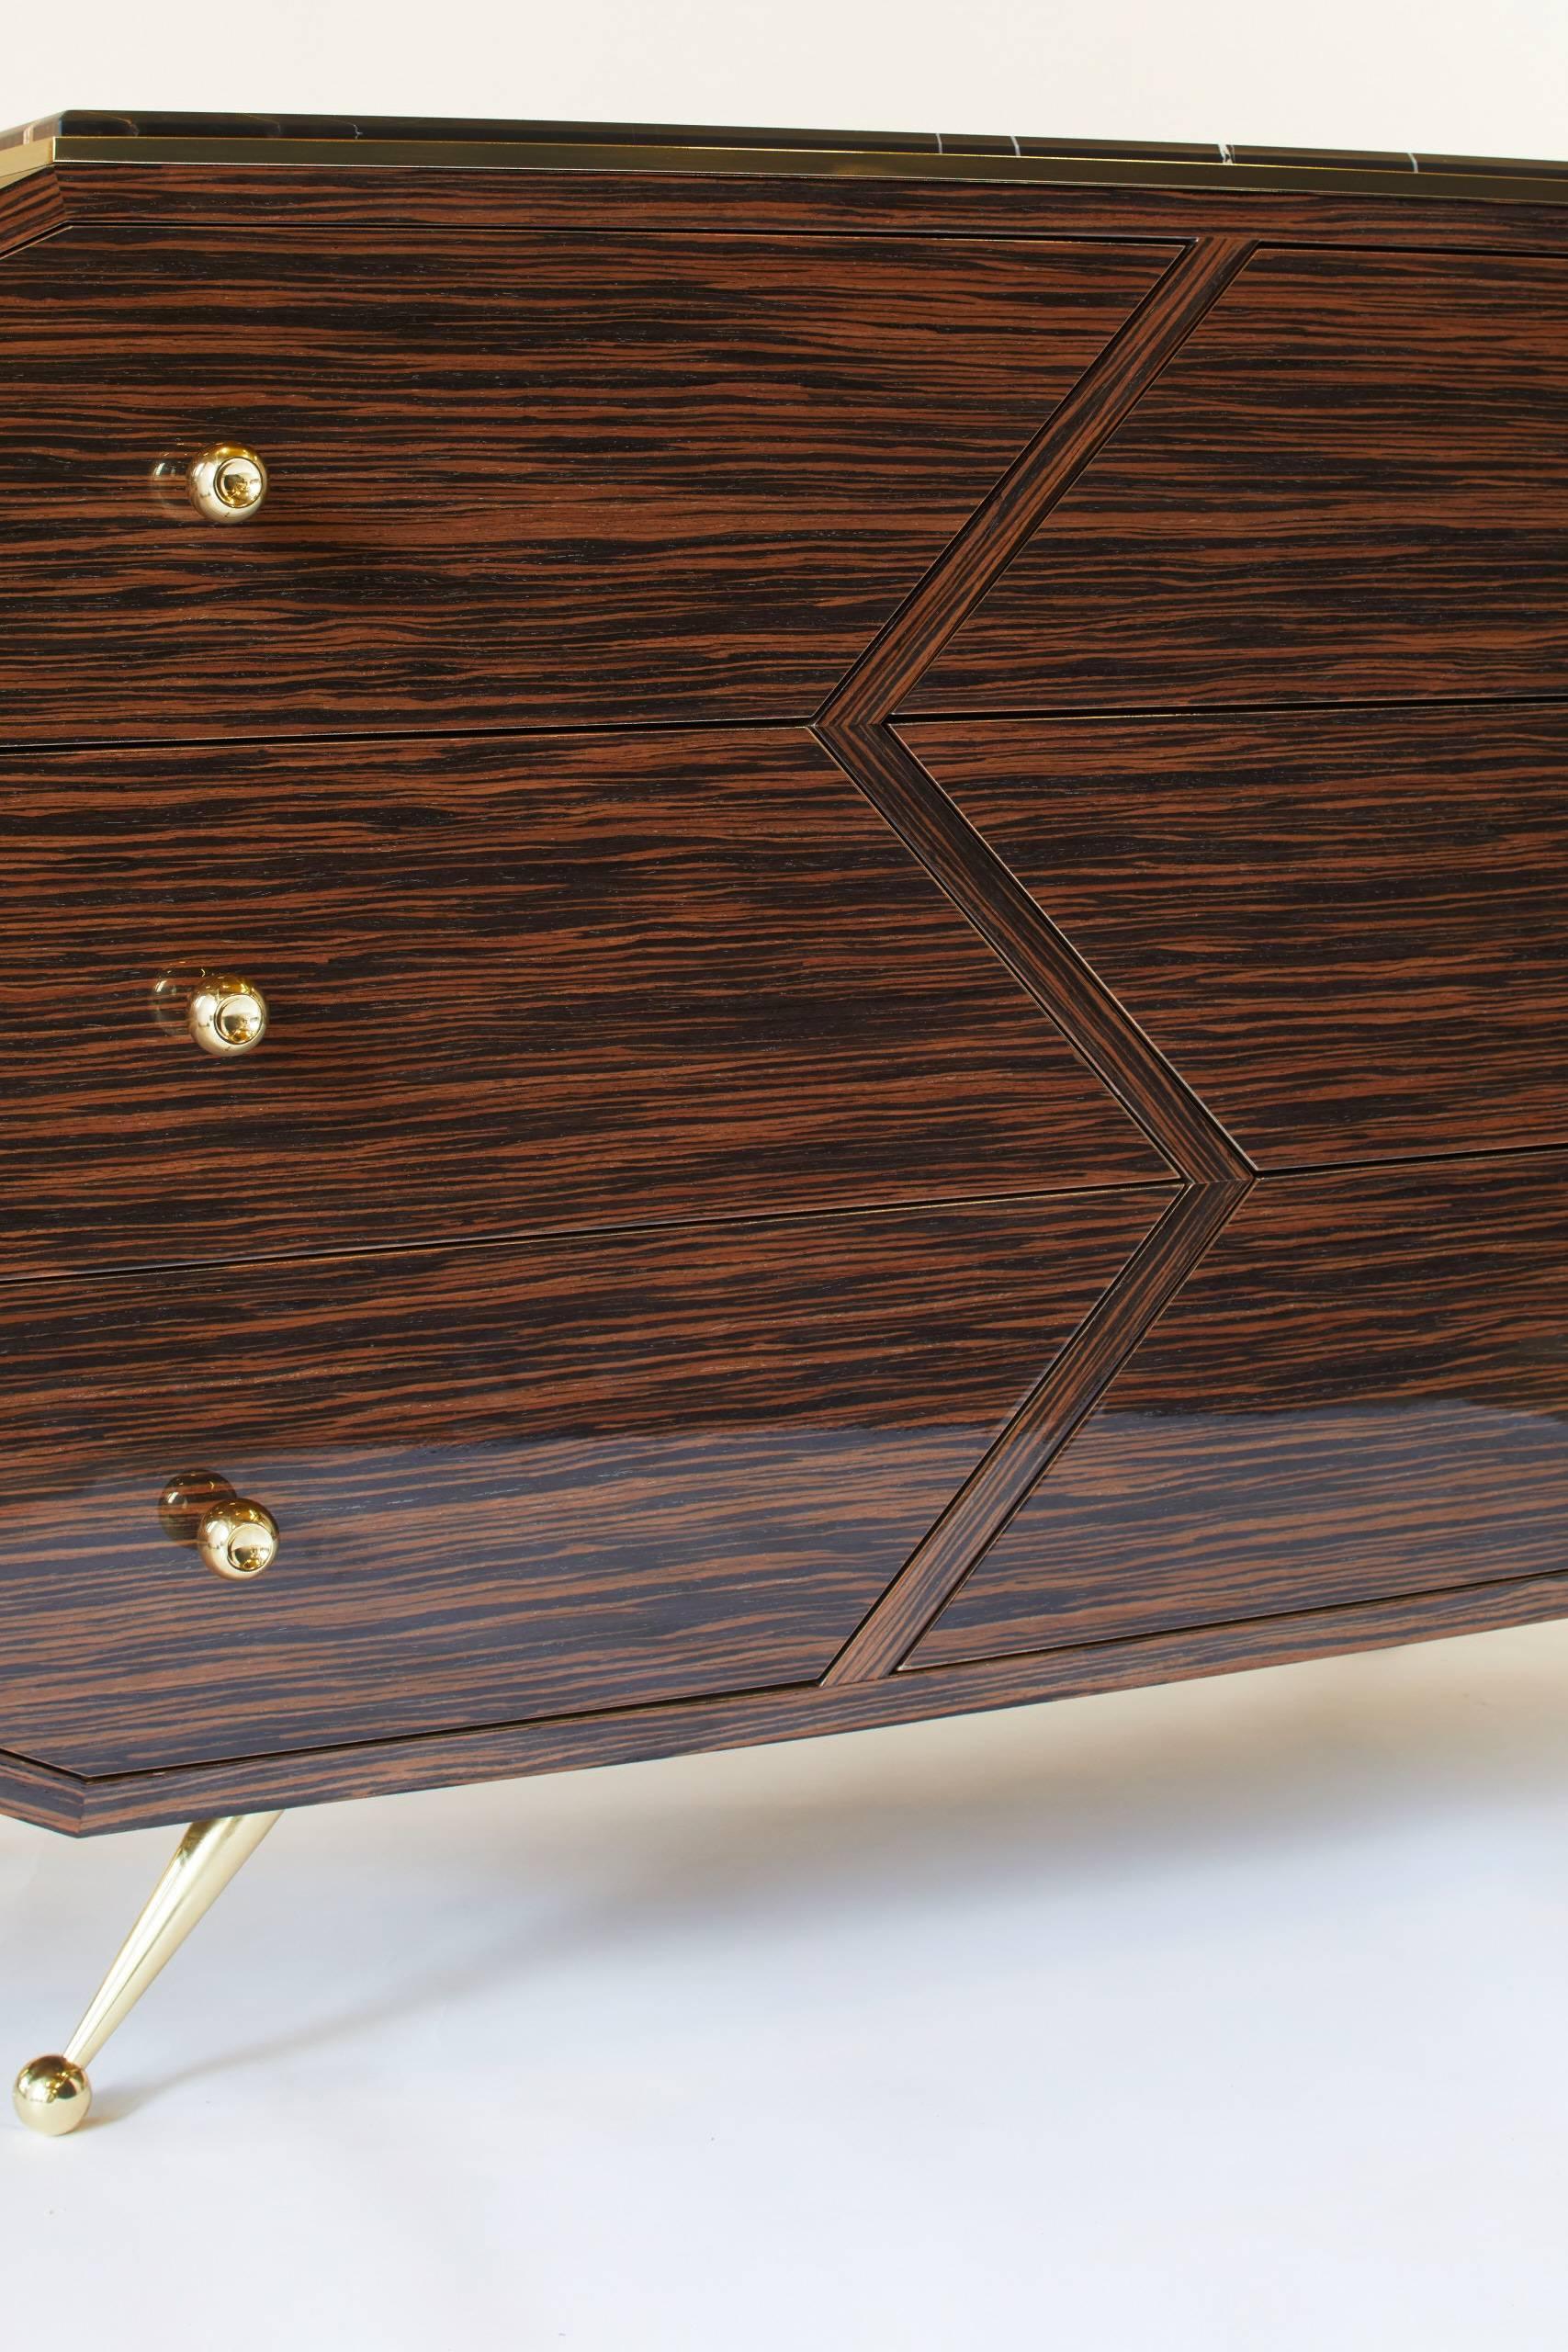 Canadian Macassar Ebony Cabinet In High Gloss With Italian Marble Top & Brass Details For Sale